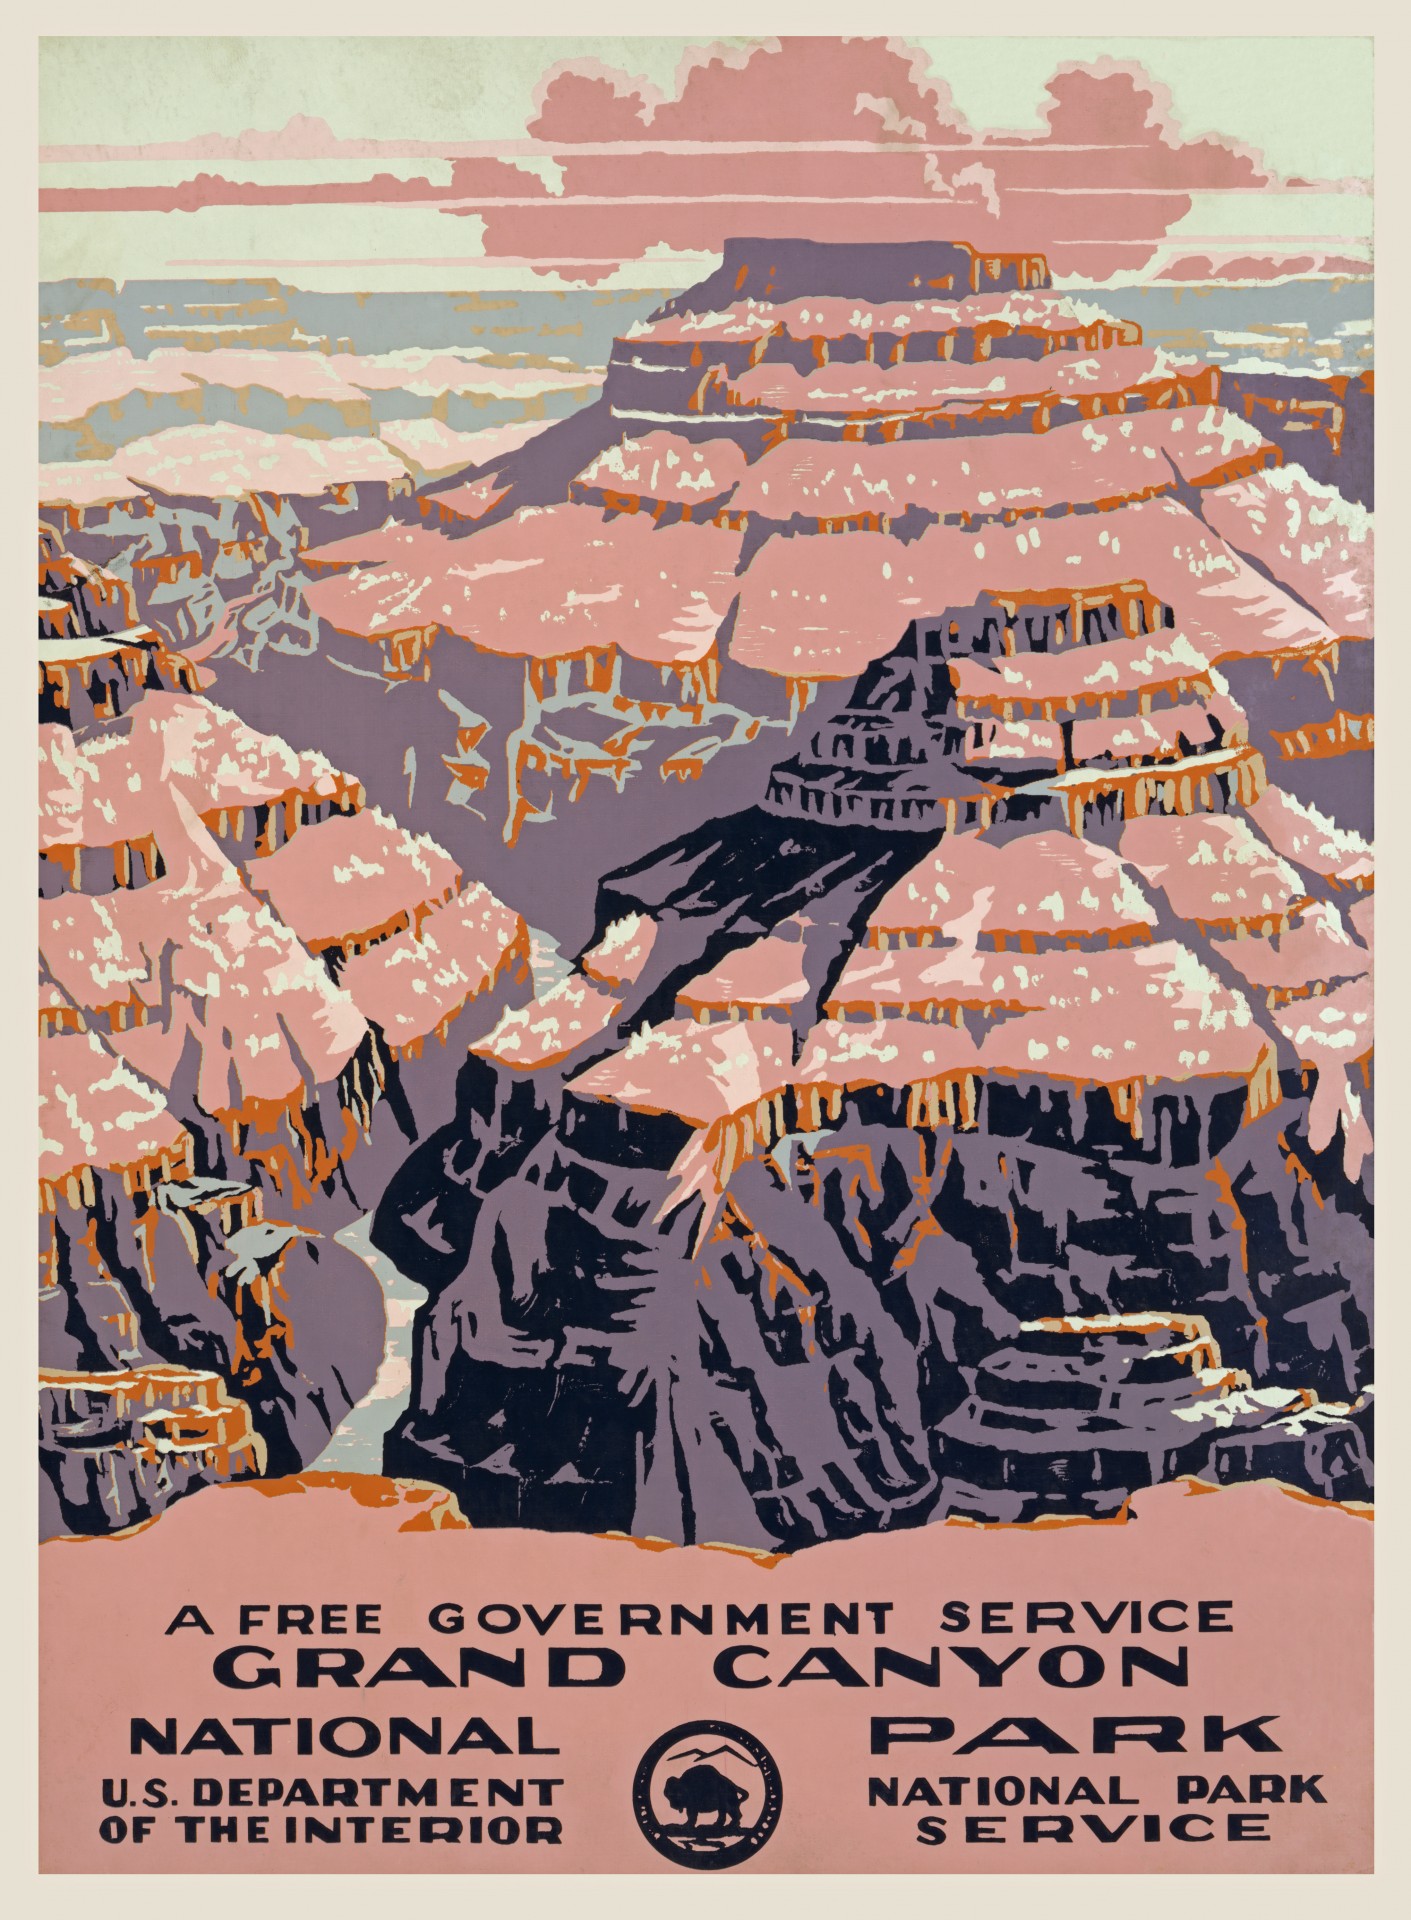 Public domain poster available from the library of congress. I have made some attempt to clean the poster up a bit so that it is ready for immediate use and printing.